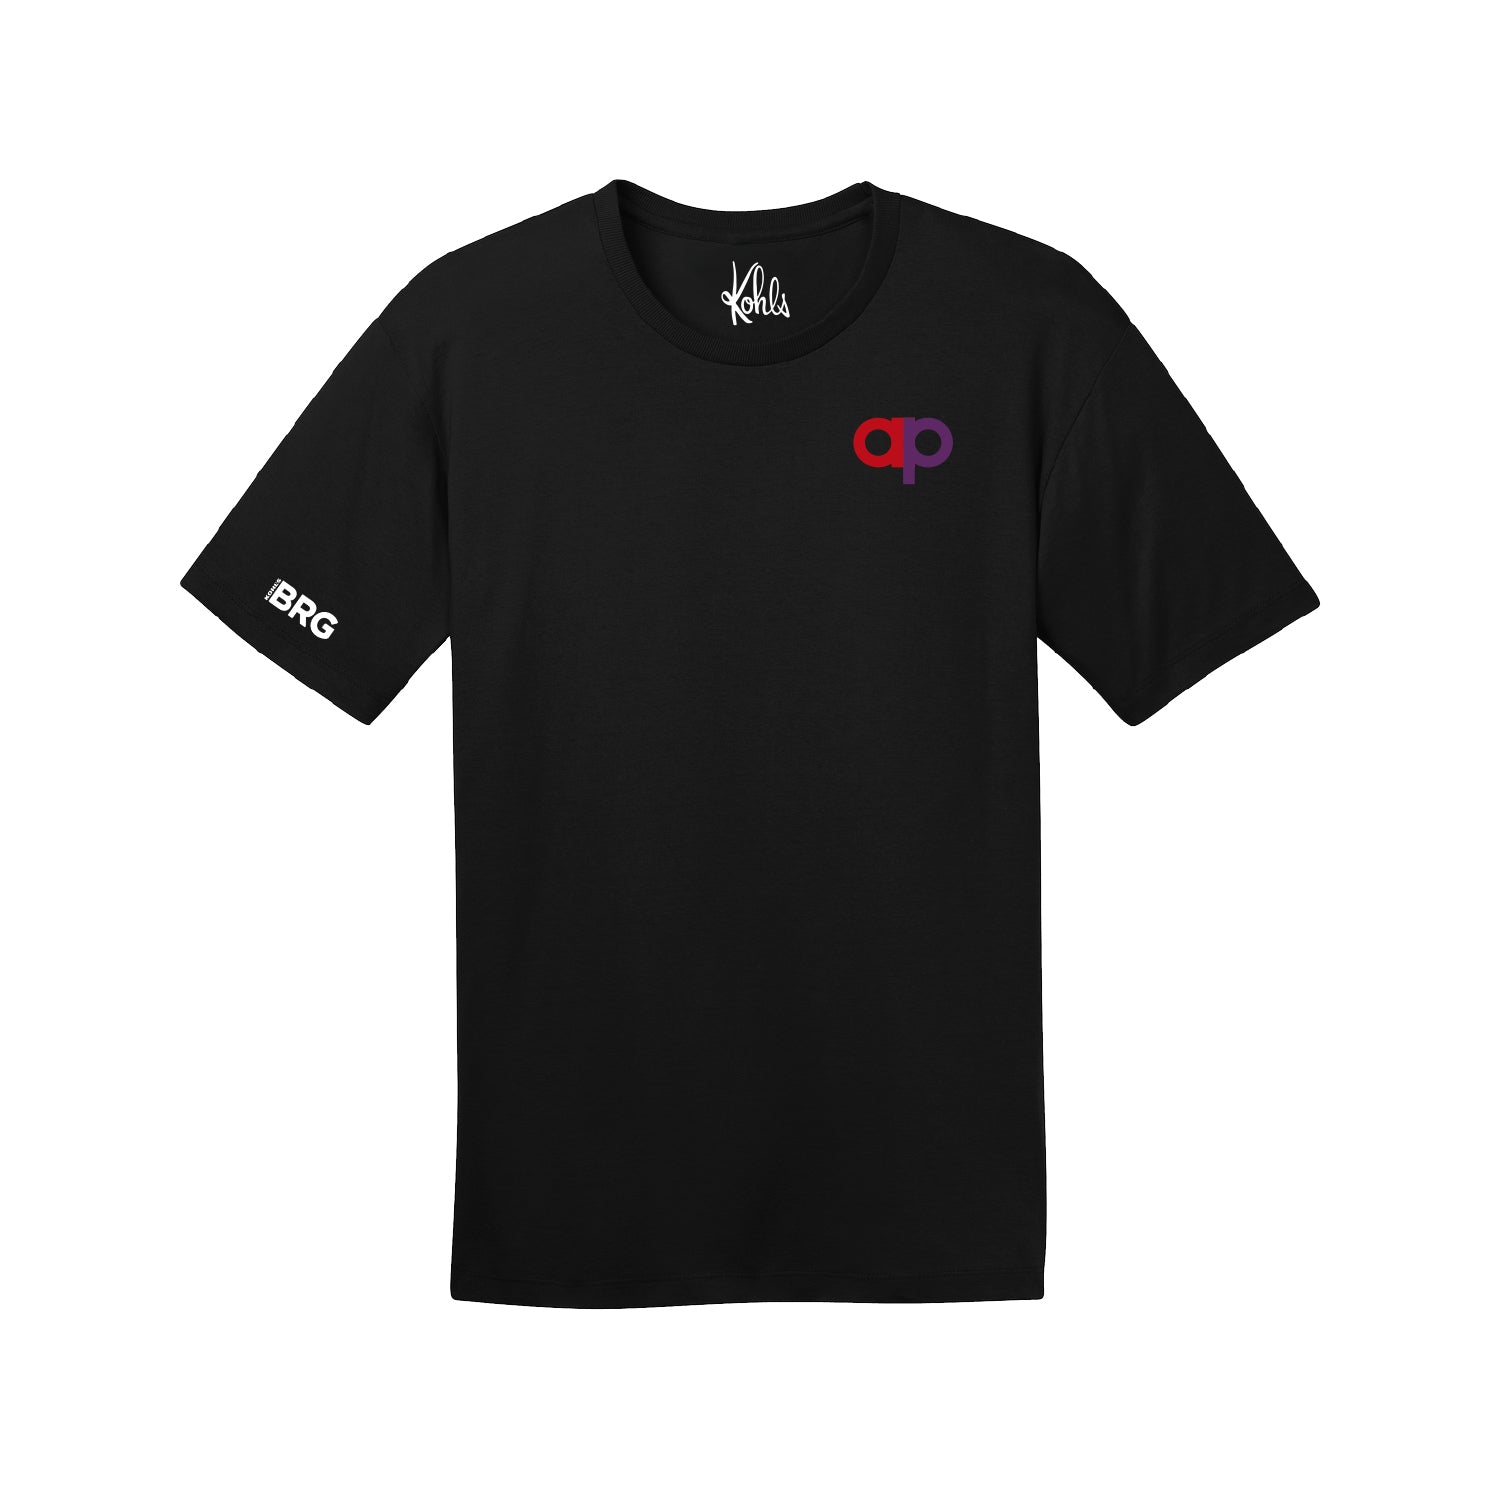 KLM ASIAN PACIFIC BRG TEE